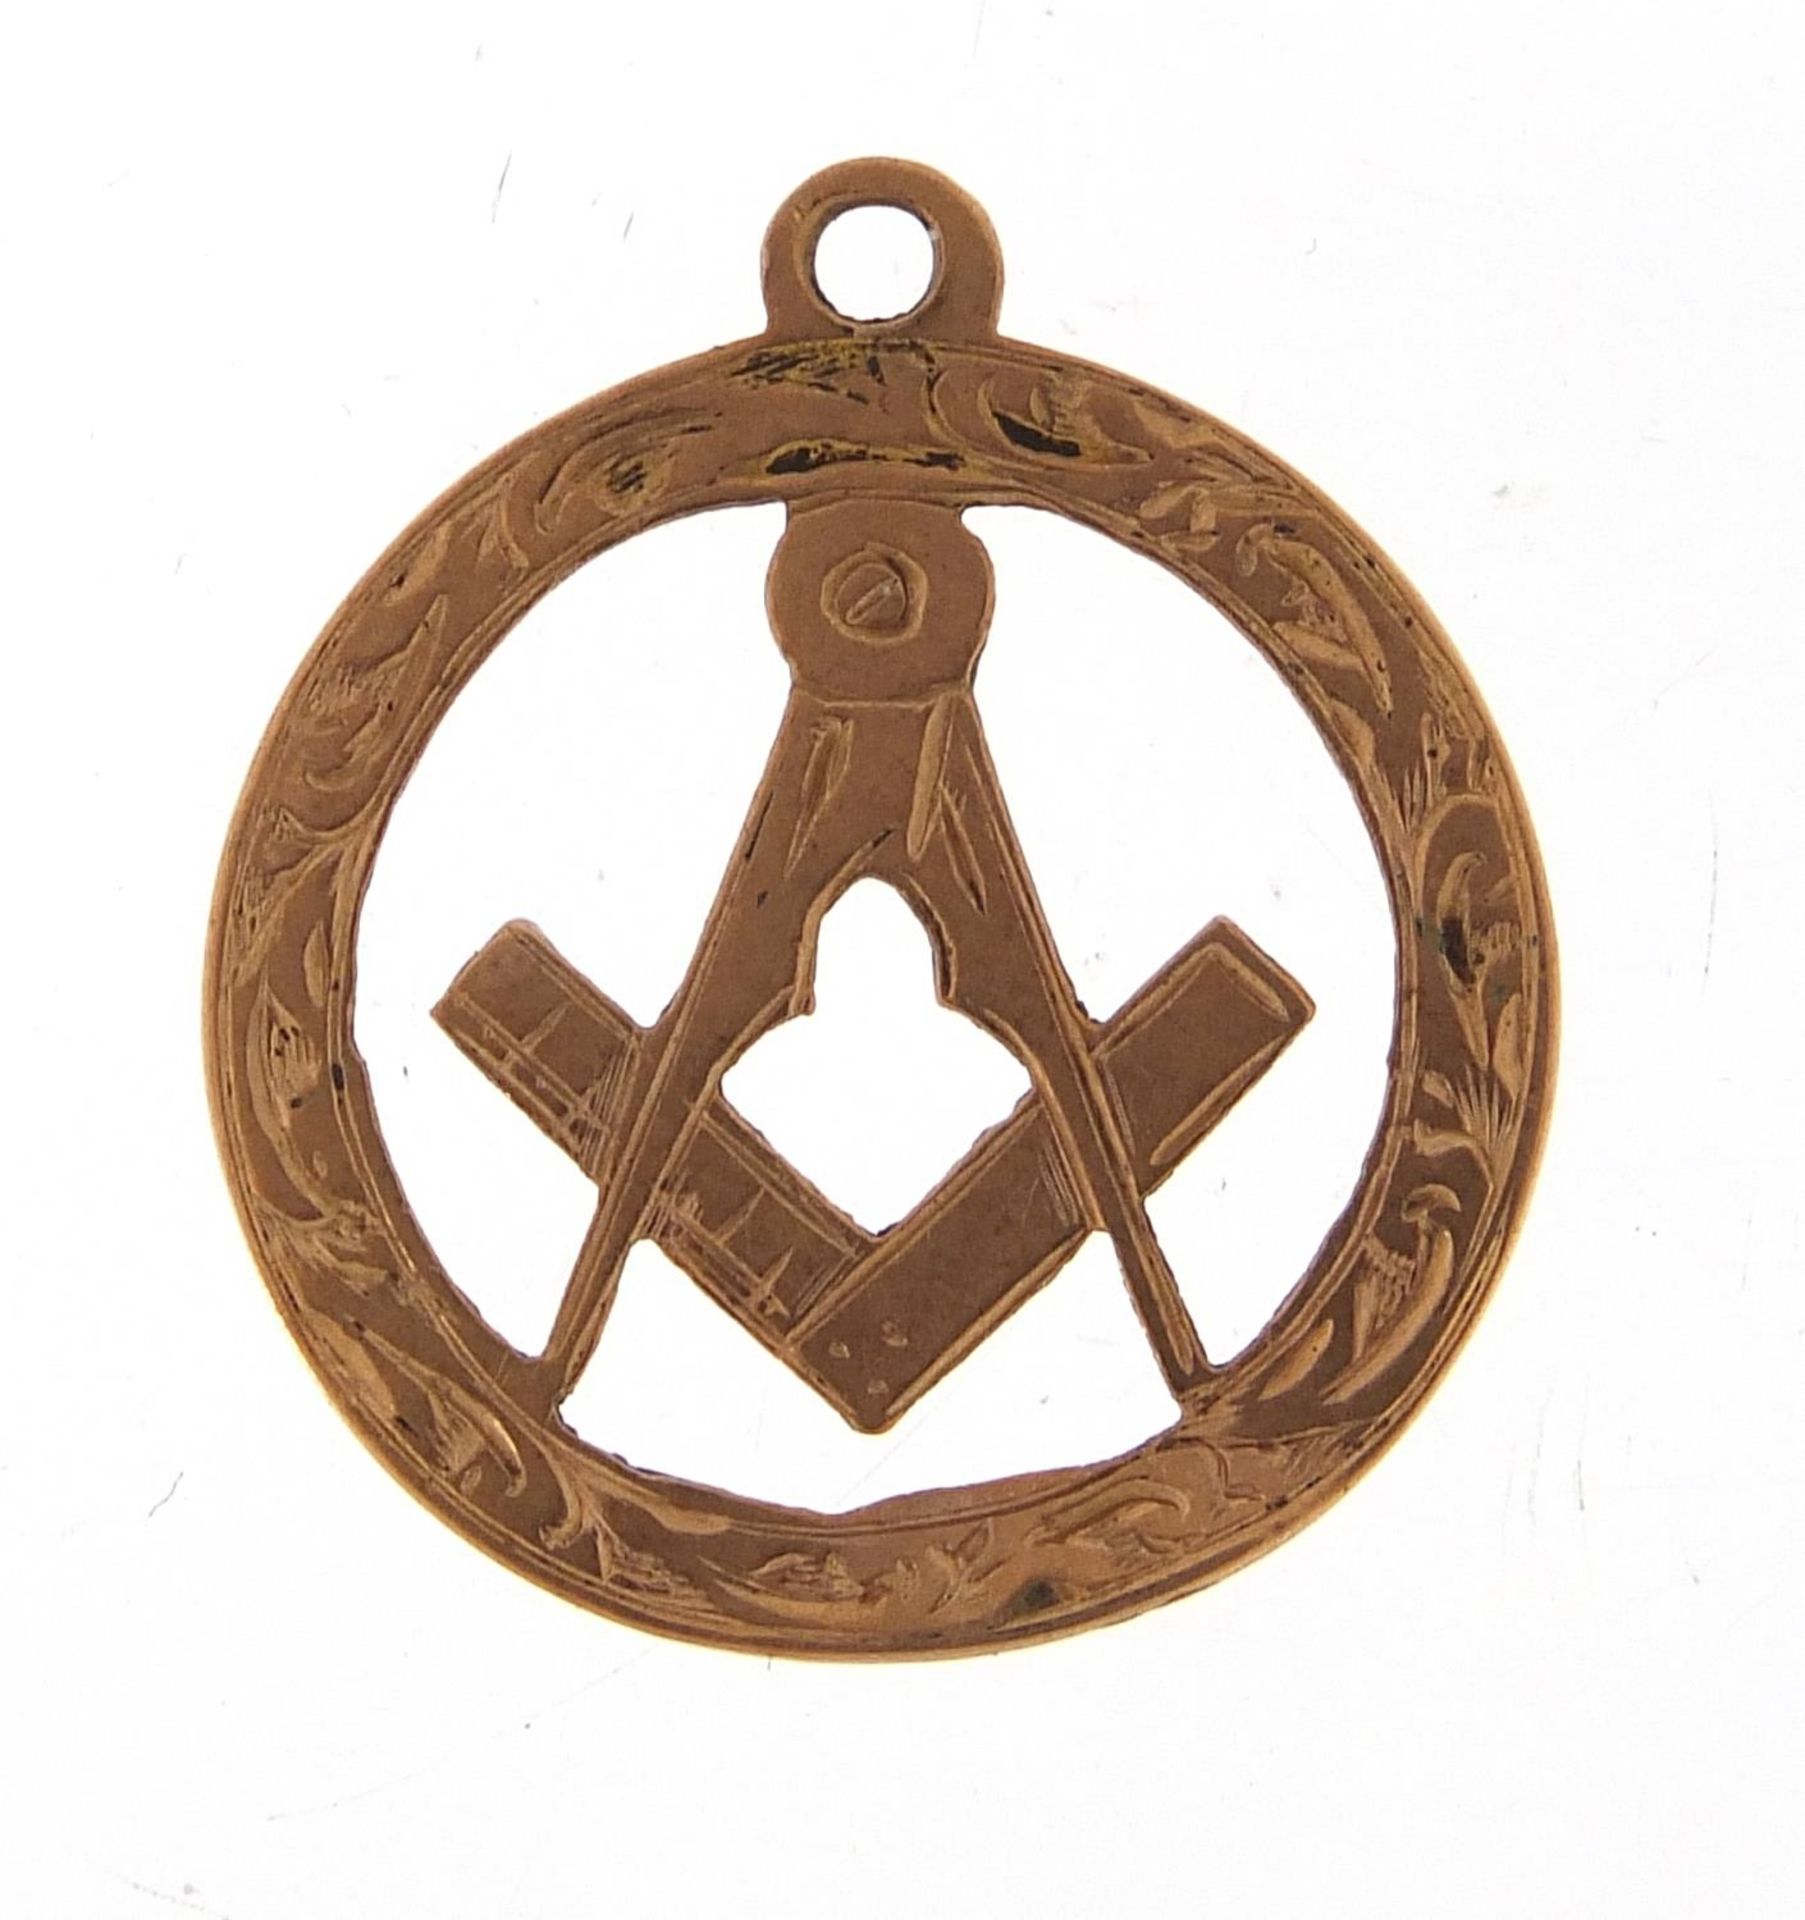 9ct gold masonic charm, 2.1cm in length, 1.3g : For Further Condition Reports Please Visit Our